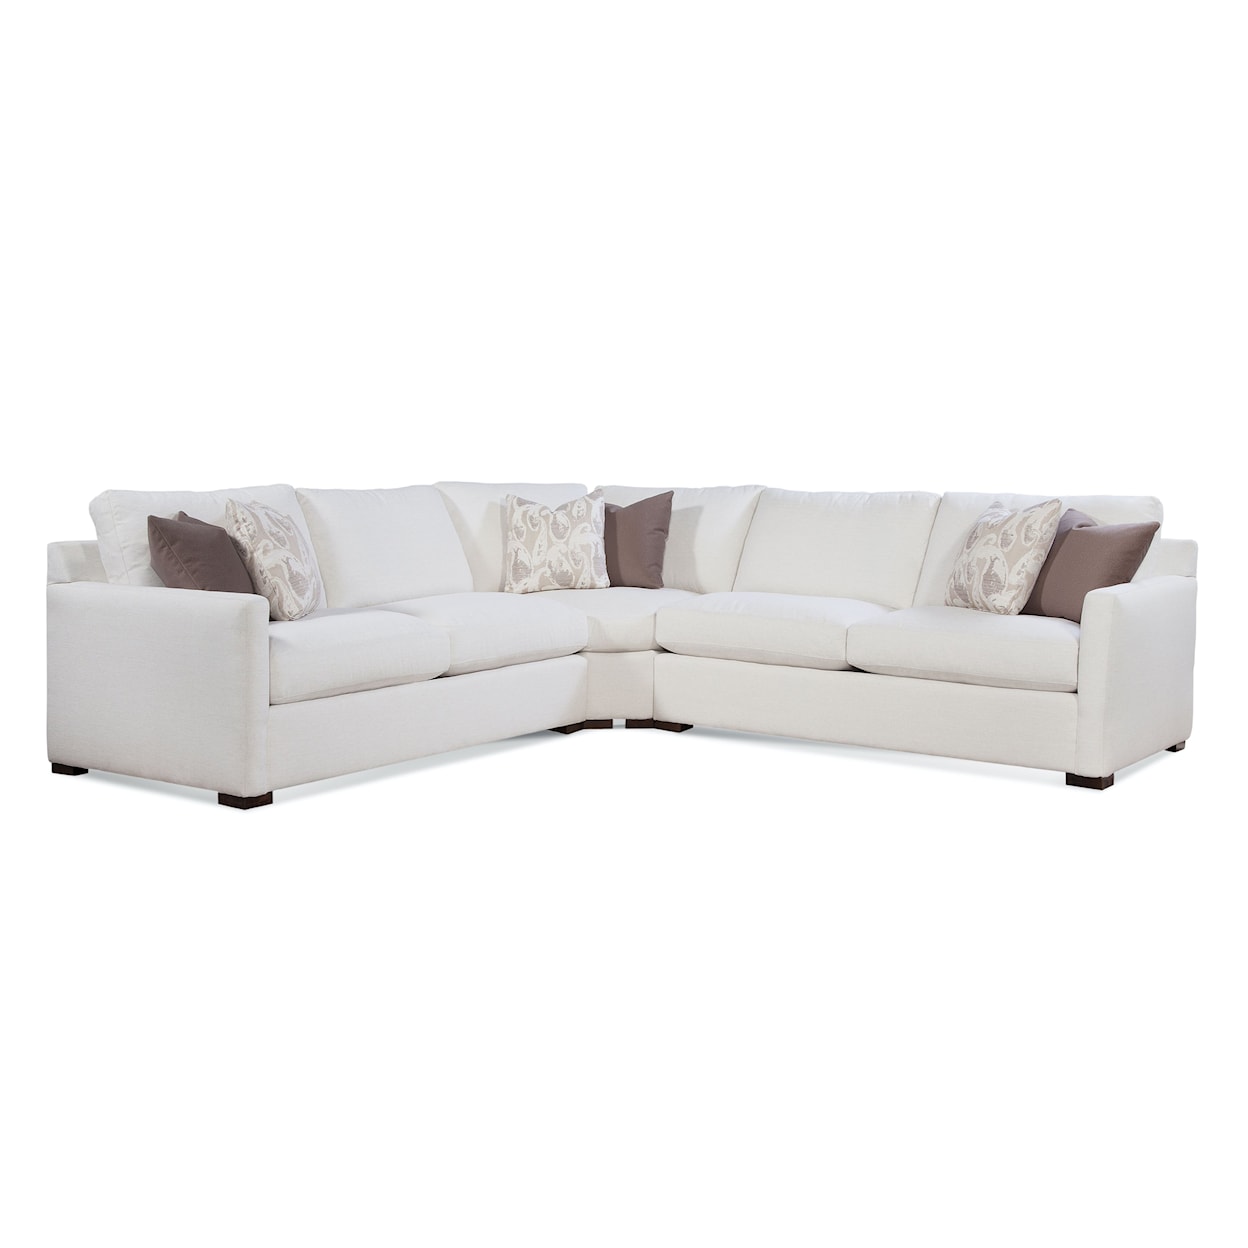 Braxton Culler Bel-Air 3-Piece Wedge Sectional Sofa